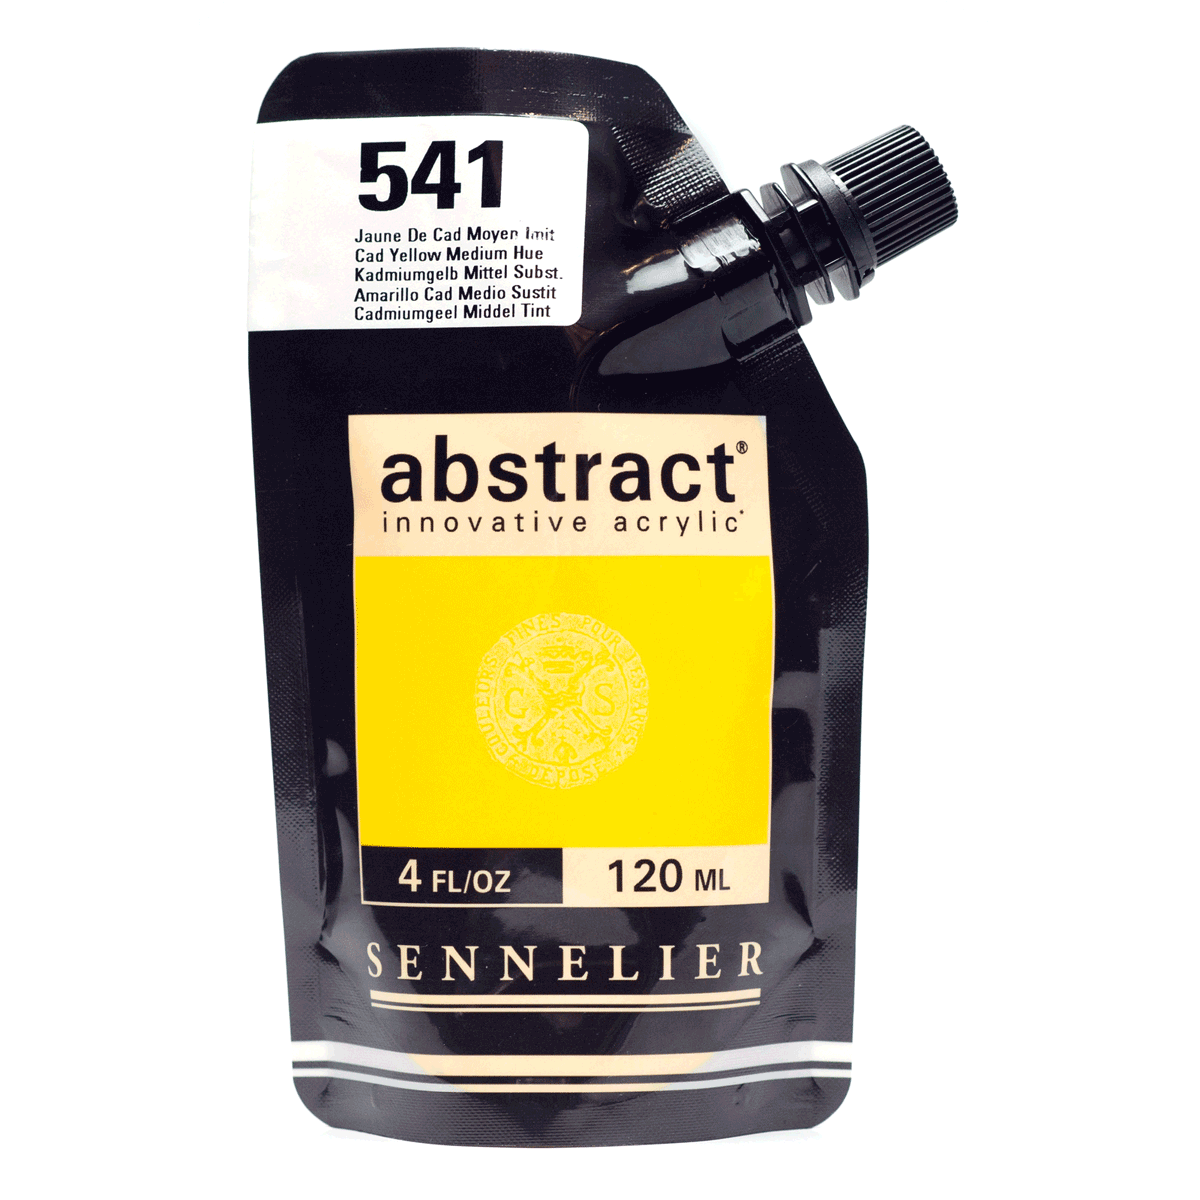 Abstract Acrylic Pouch - Satin 541 Cadmium Yellow Med Hue 120ml